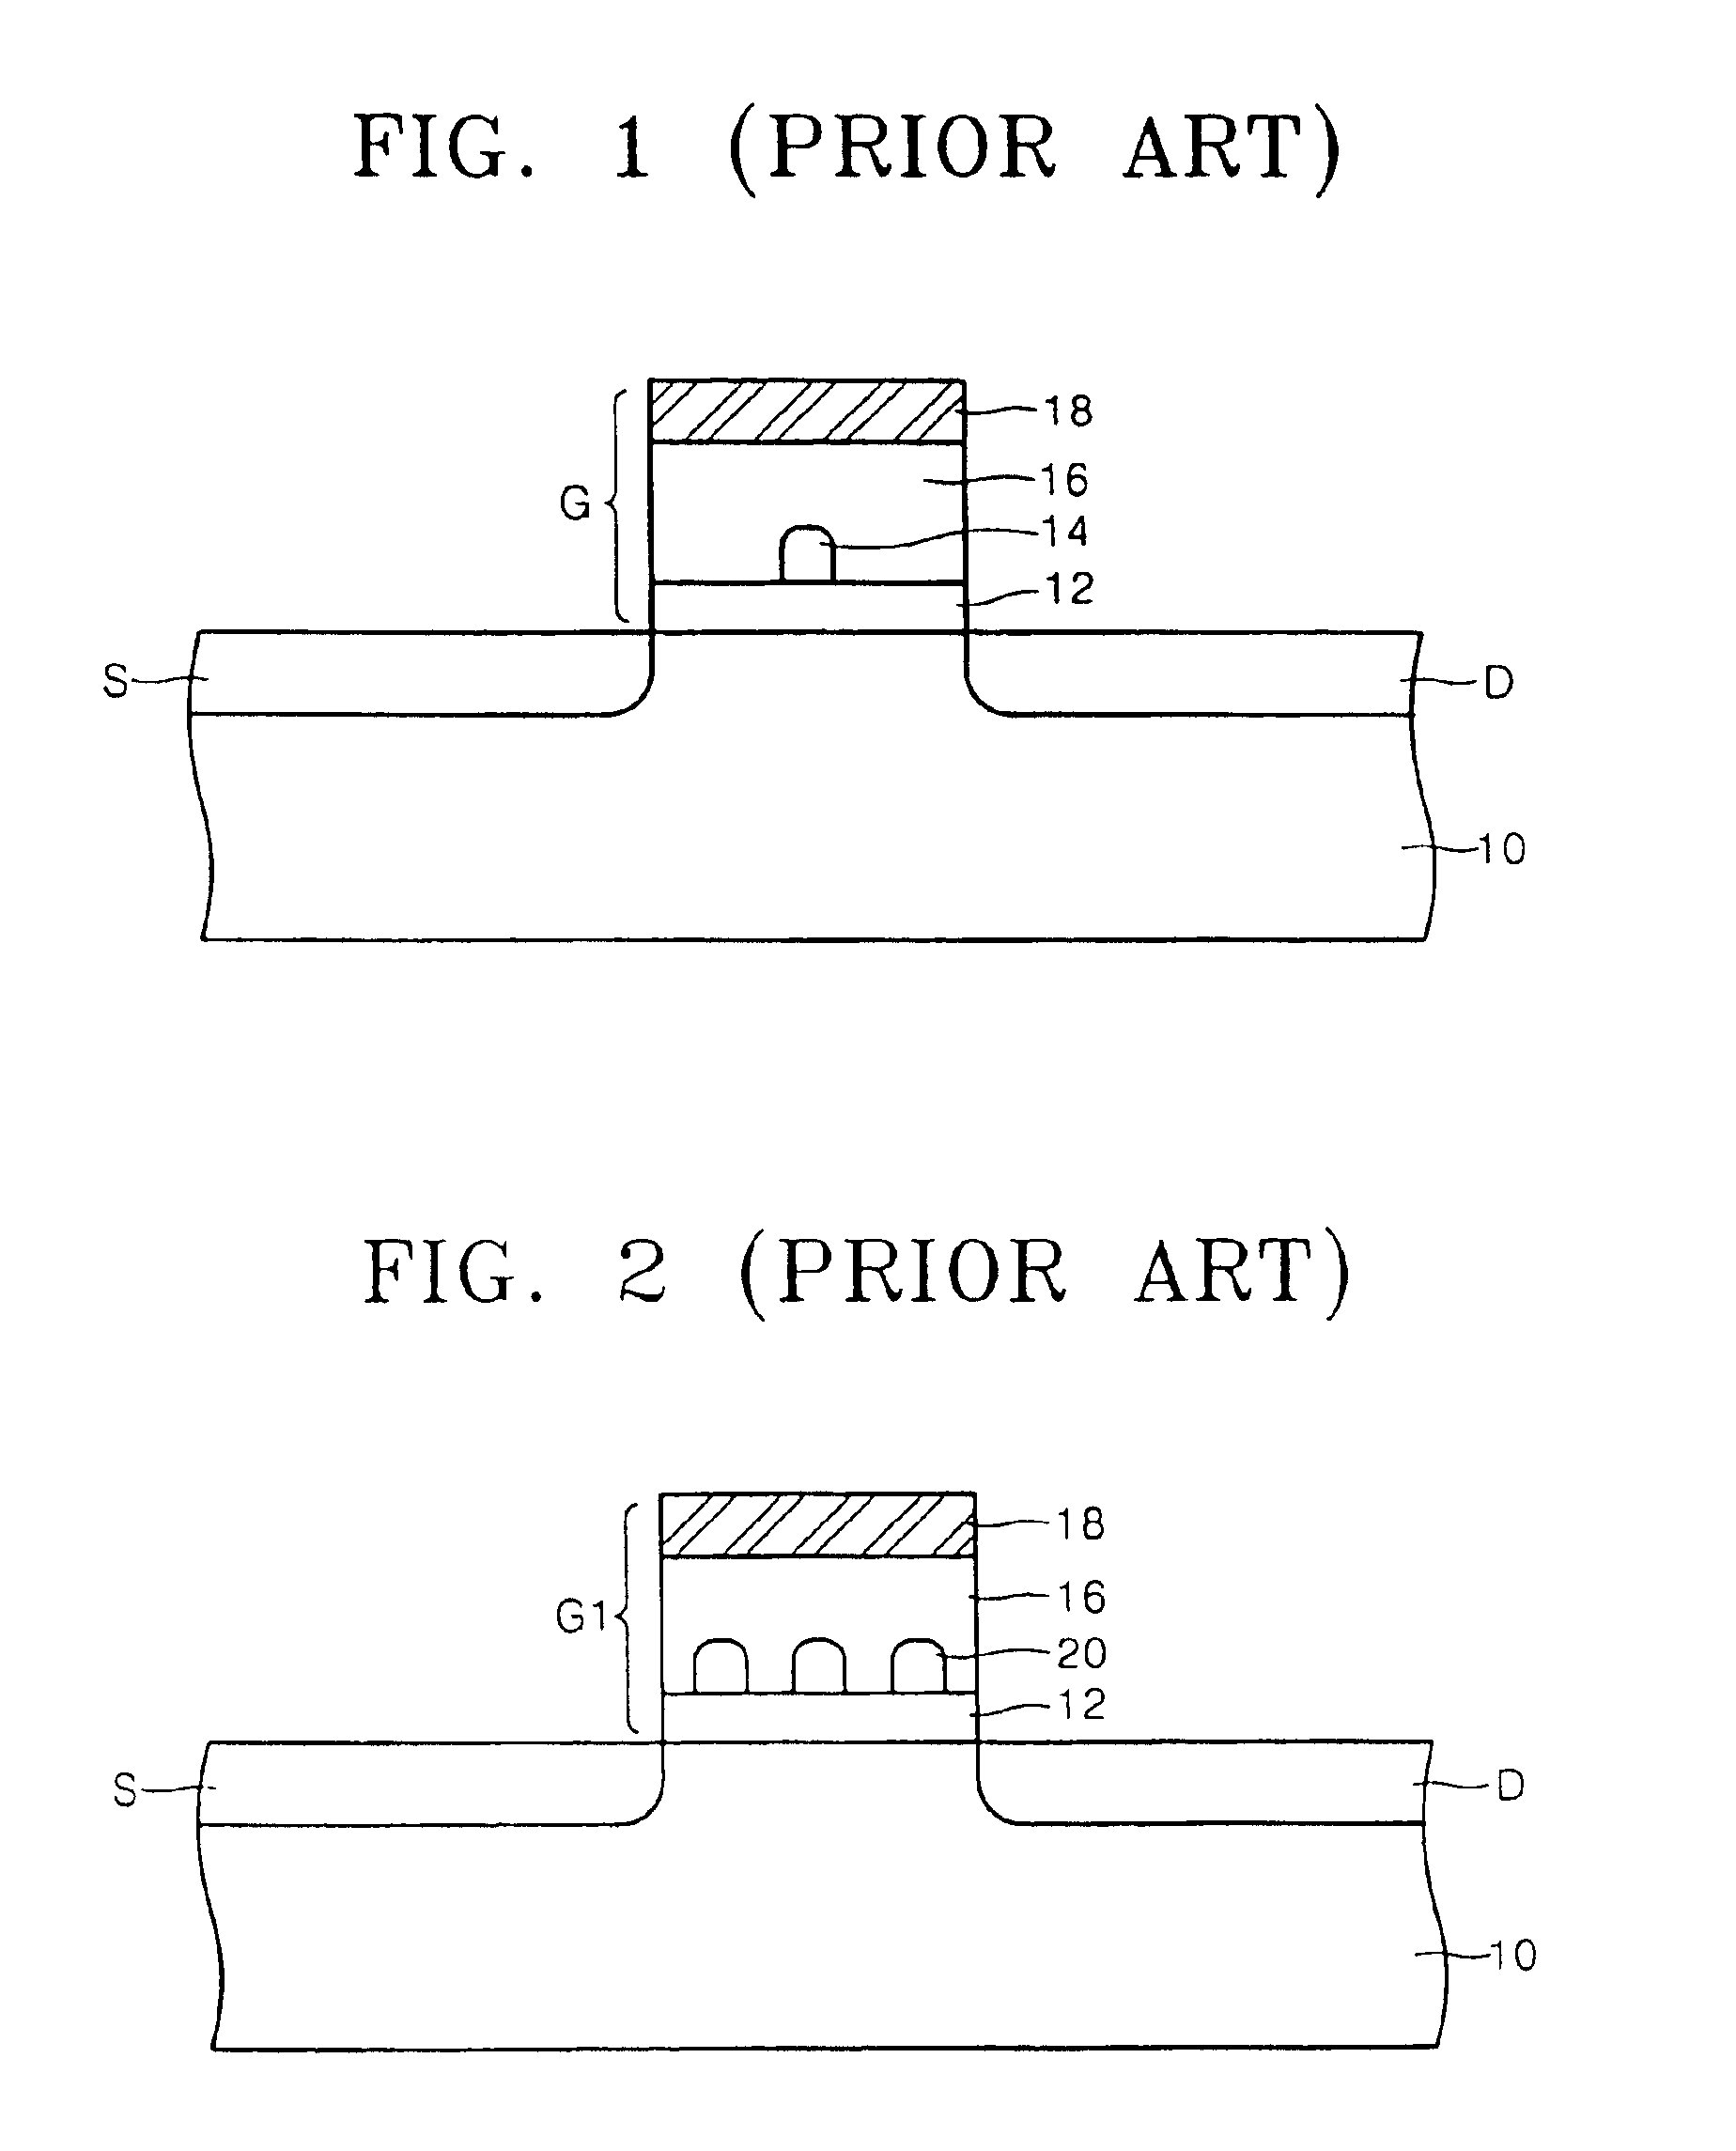 Method for manufacturing a single electron memory device having quantum dots between gate electrode and single electron storage element